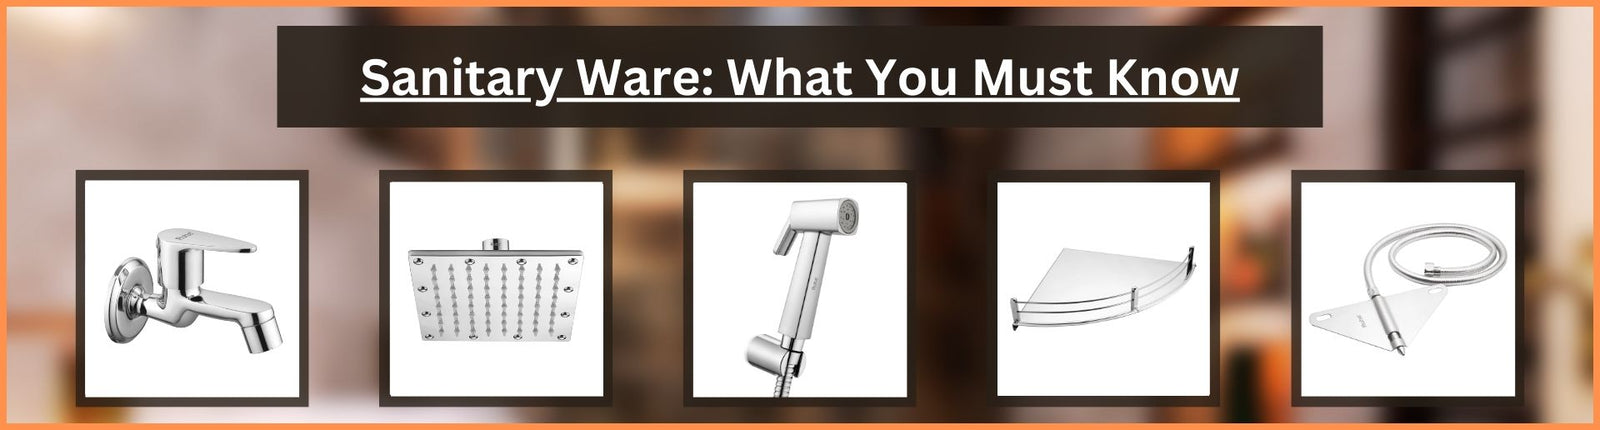 Sanitary Ware What You Must Know